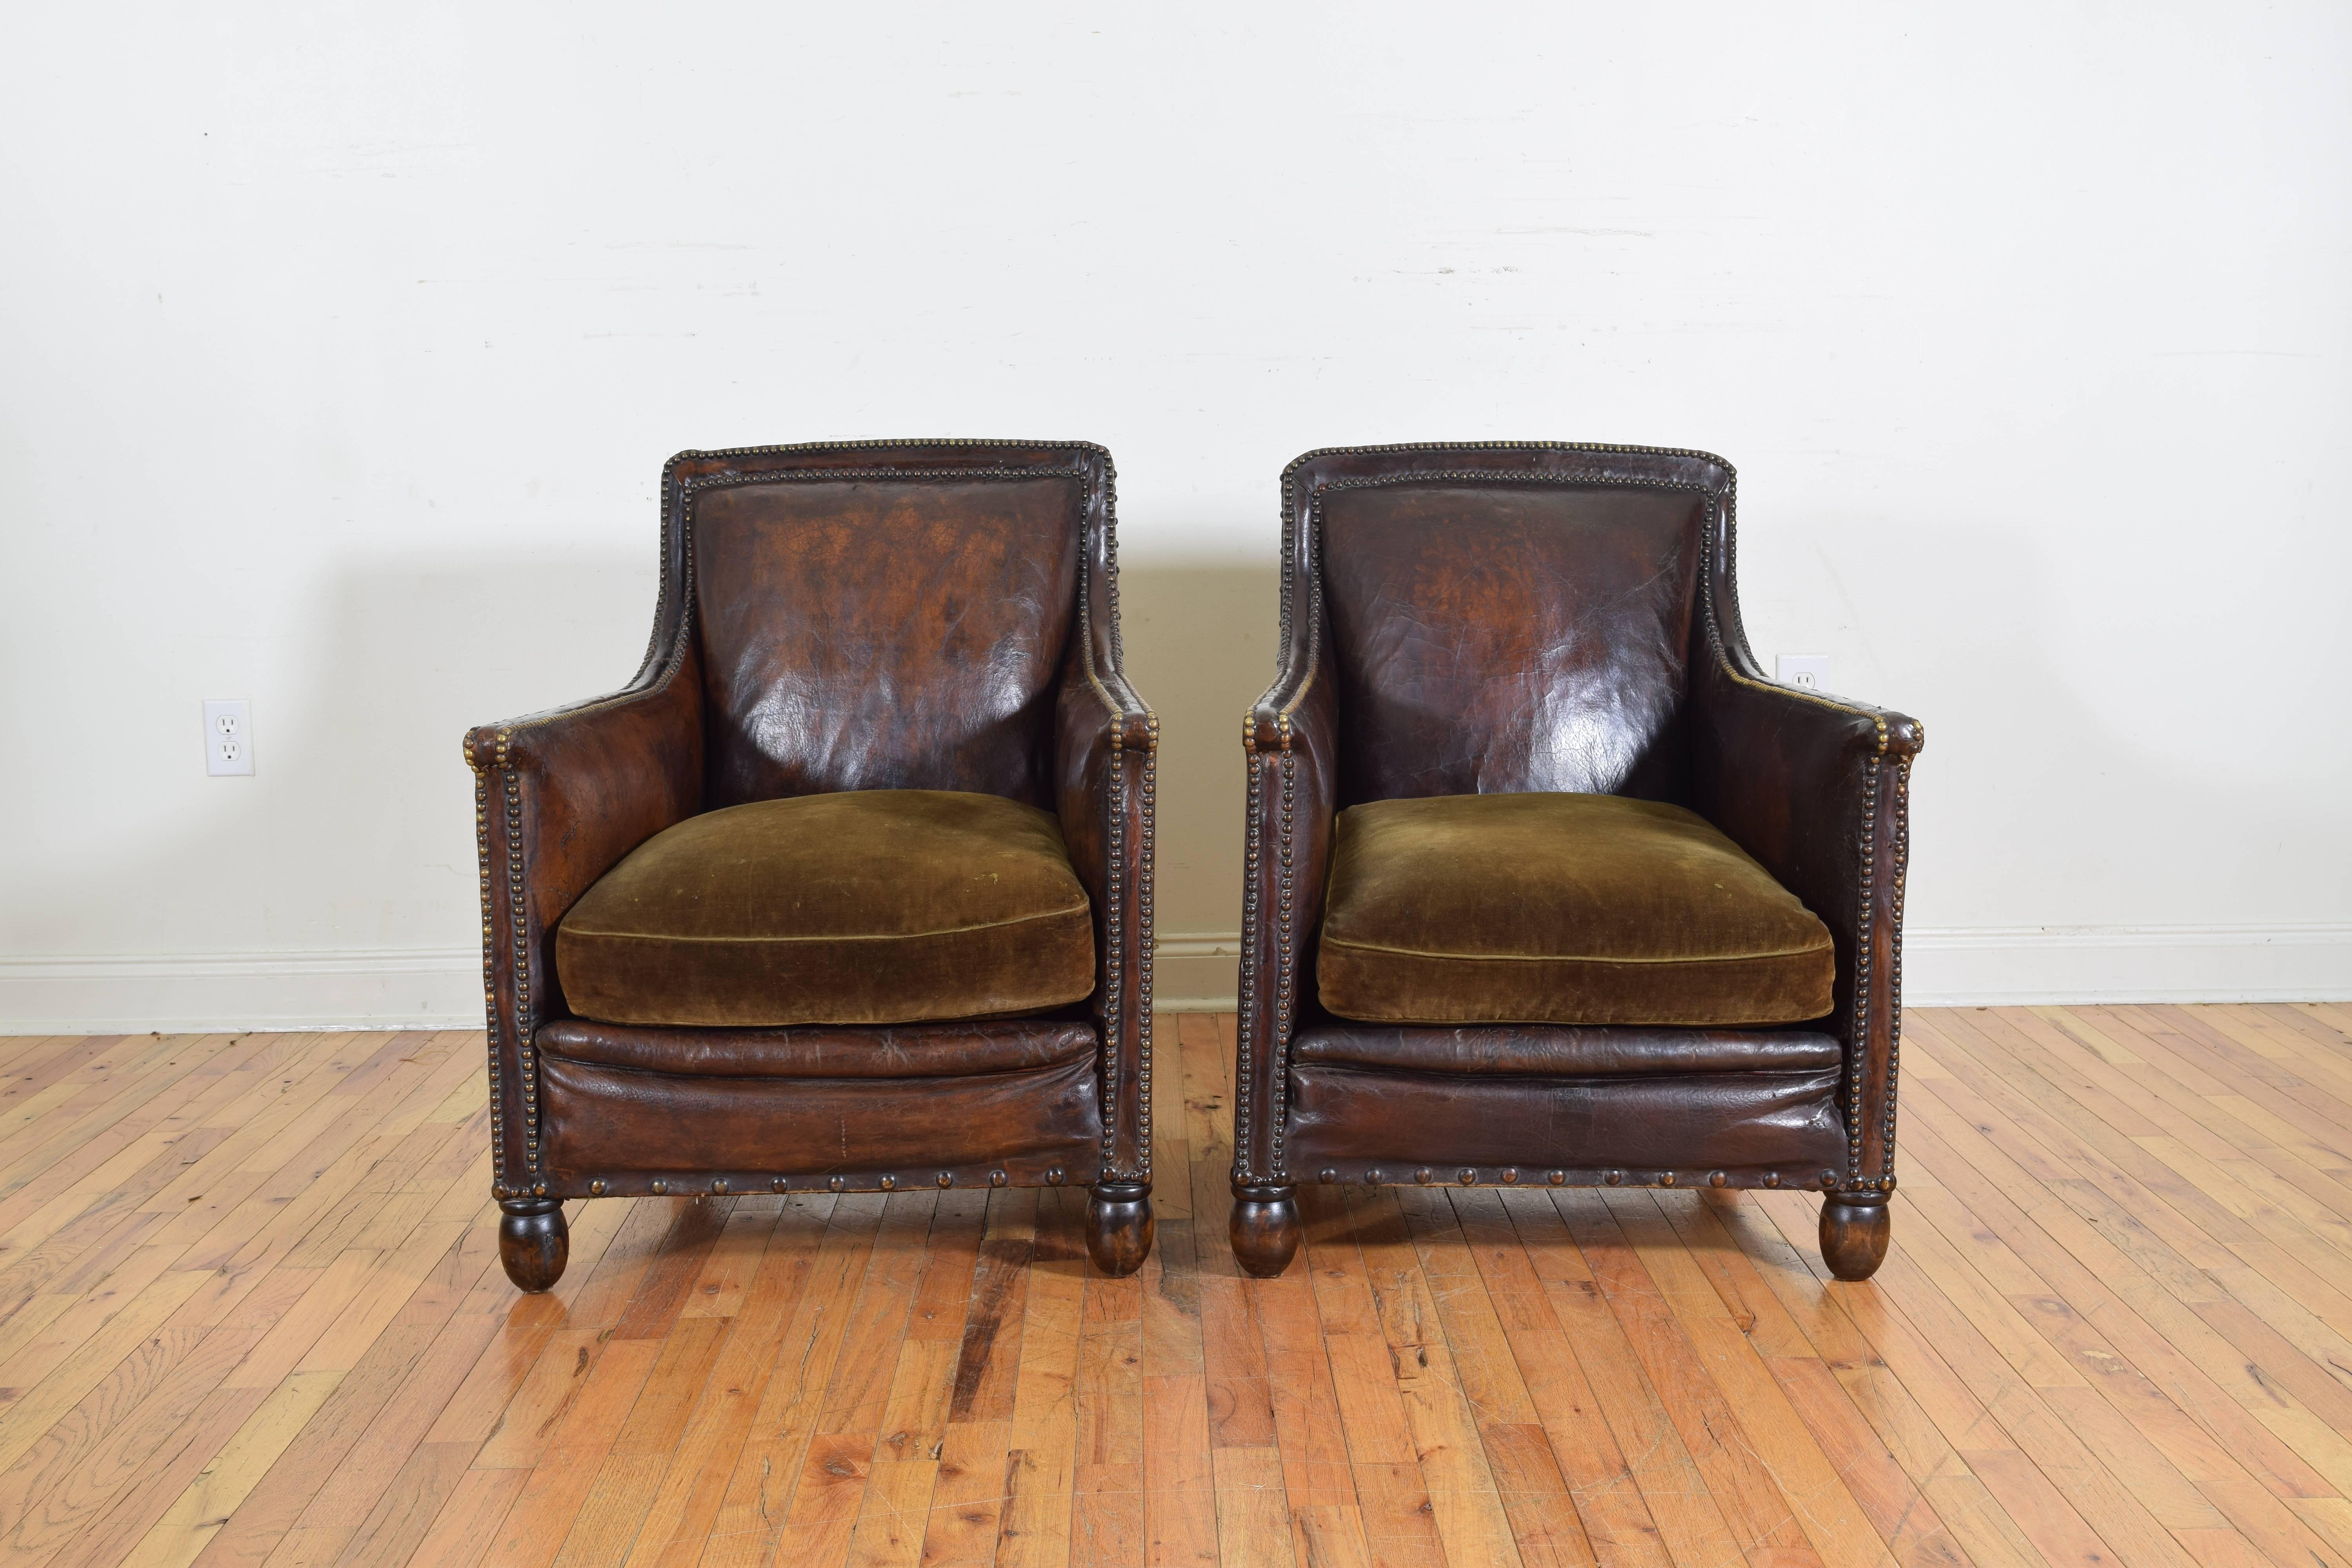 Edwardian Pair of English Leather and Velvet Upholstered Club Chairs, circa 1910